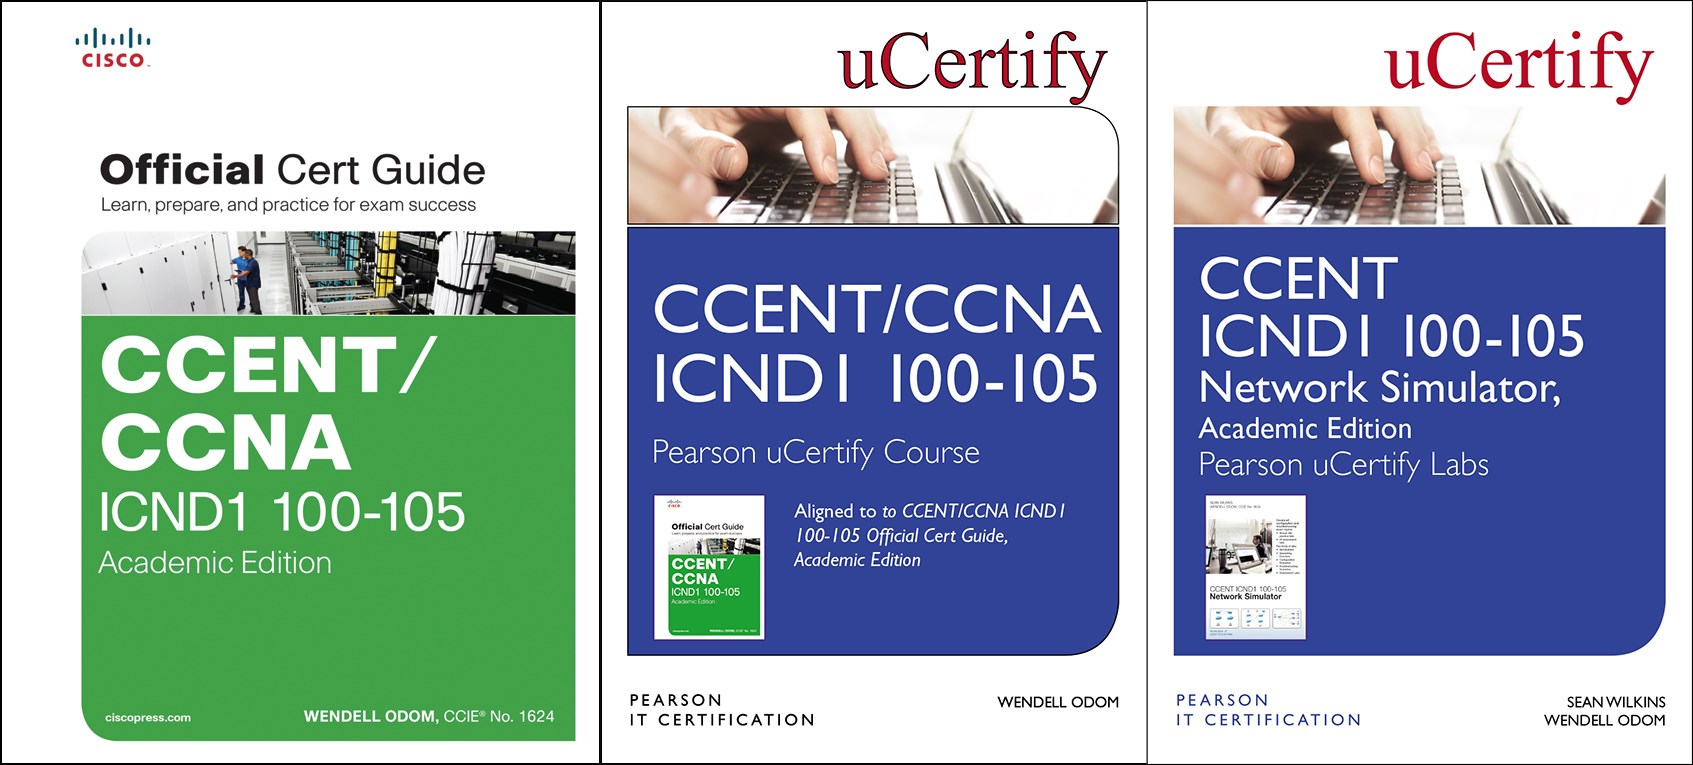 CCENT ICND1 100105 Pearson uCertify Course, Network Simulator, and